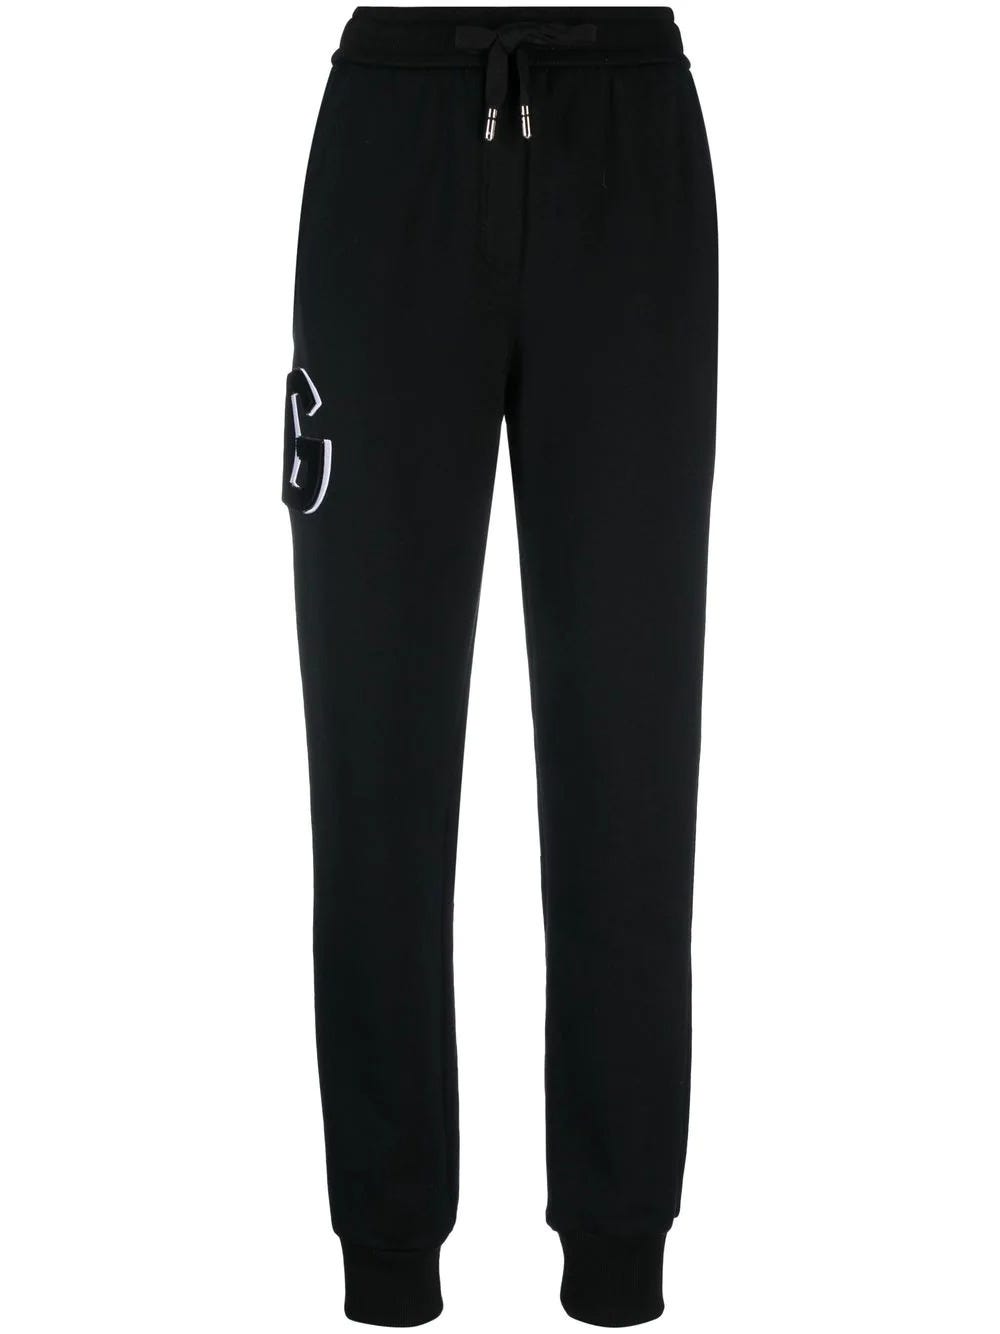 DOLCE & GABBANA SPORTS TROUSERS WITH DRAWSTRING